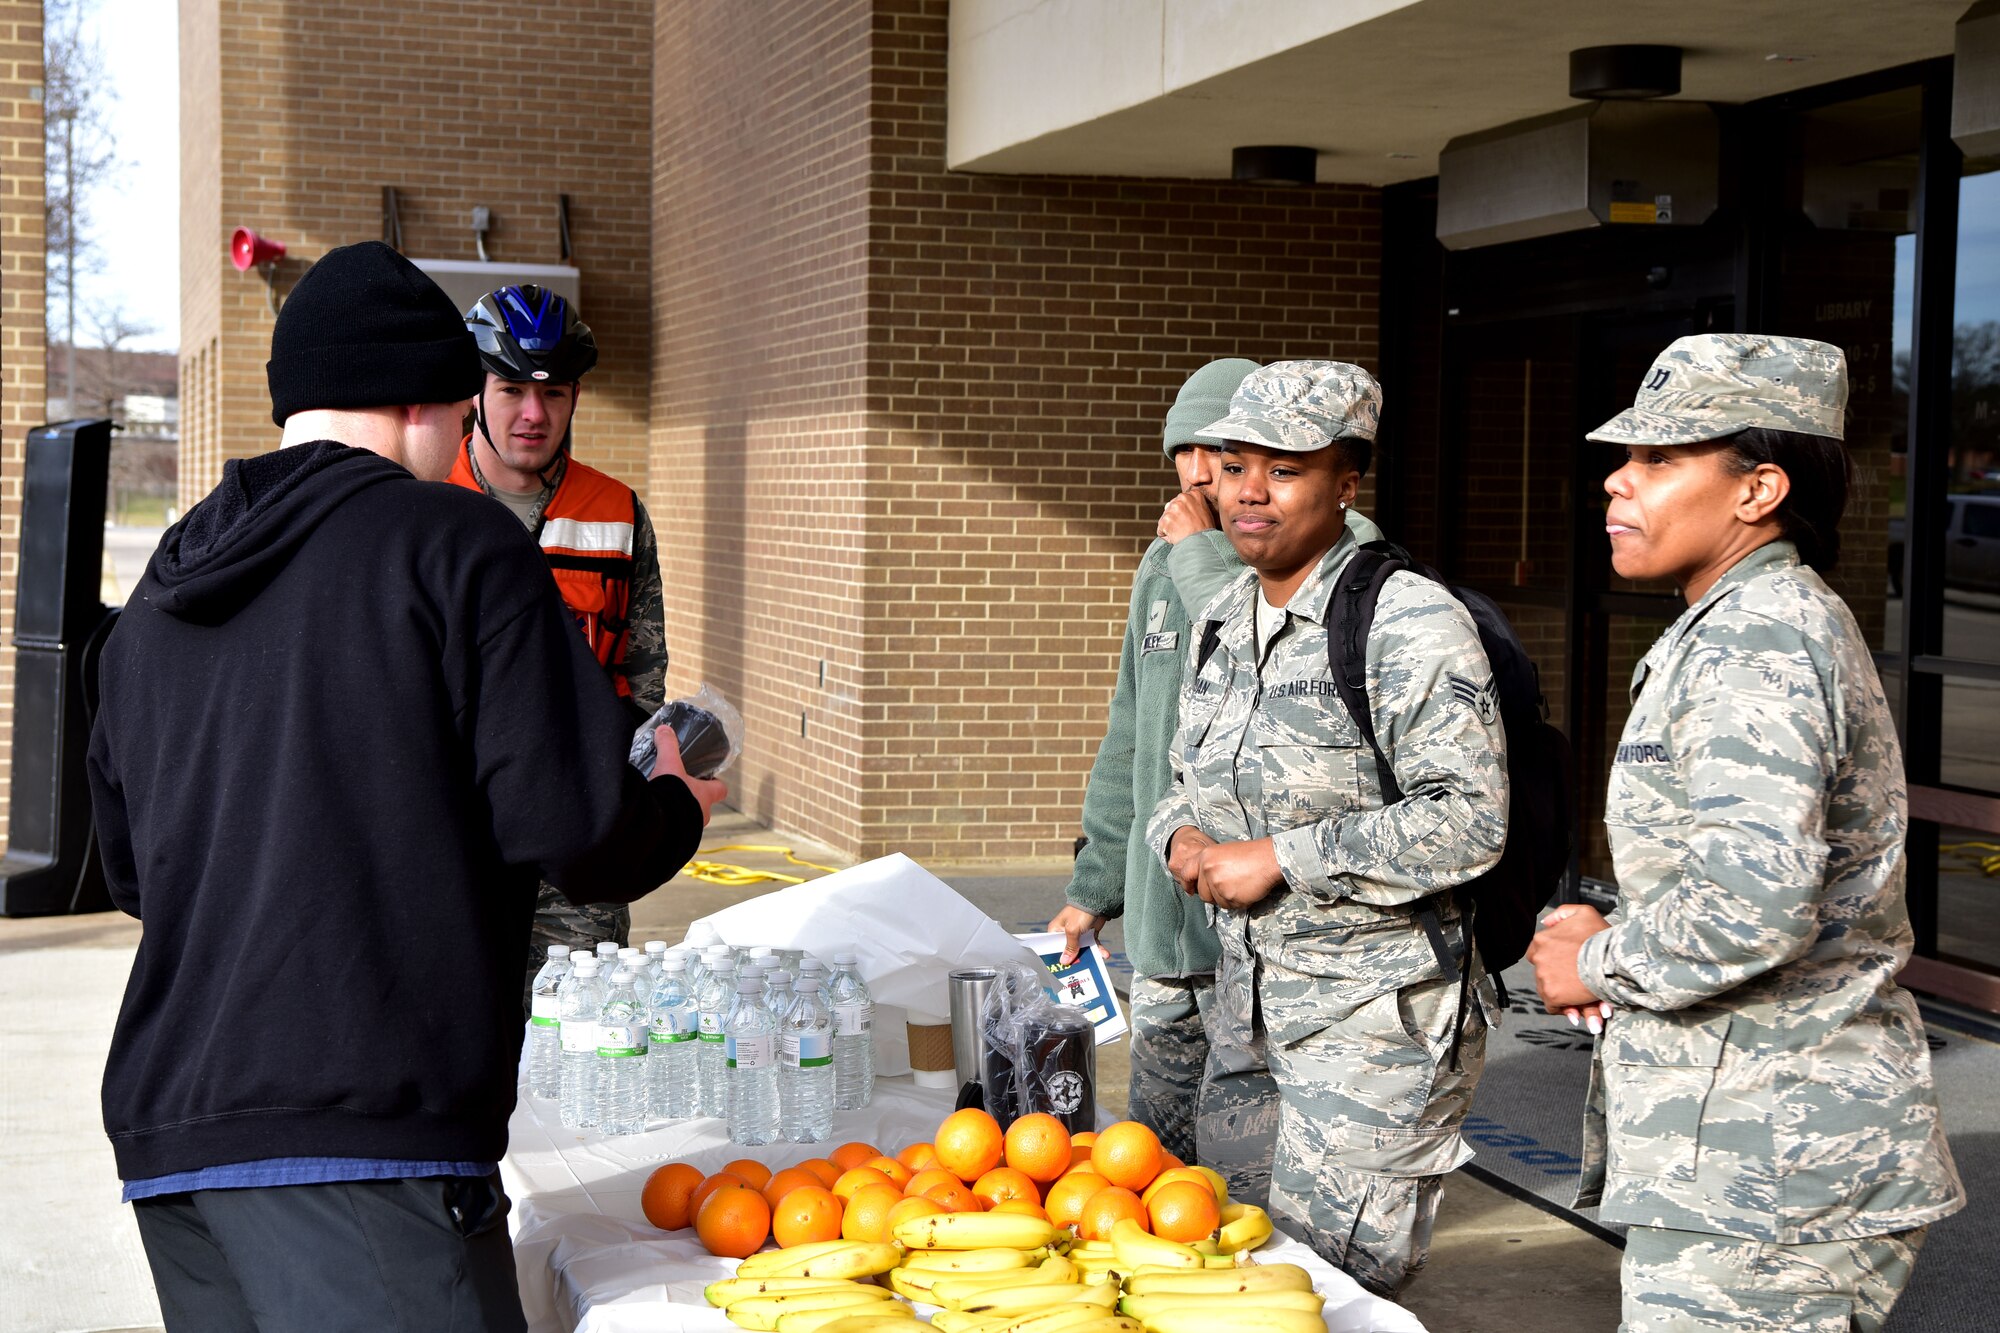 Airmen set up stand with oranges and bananas.